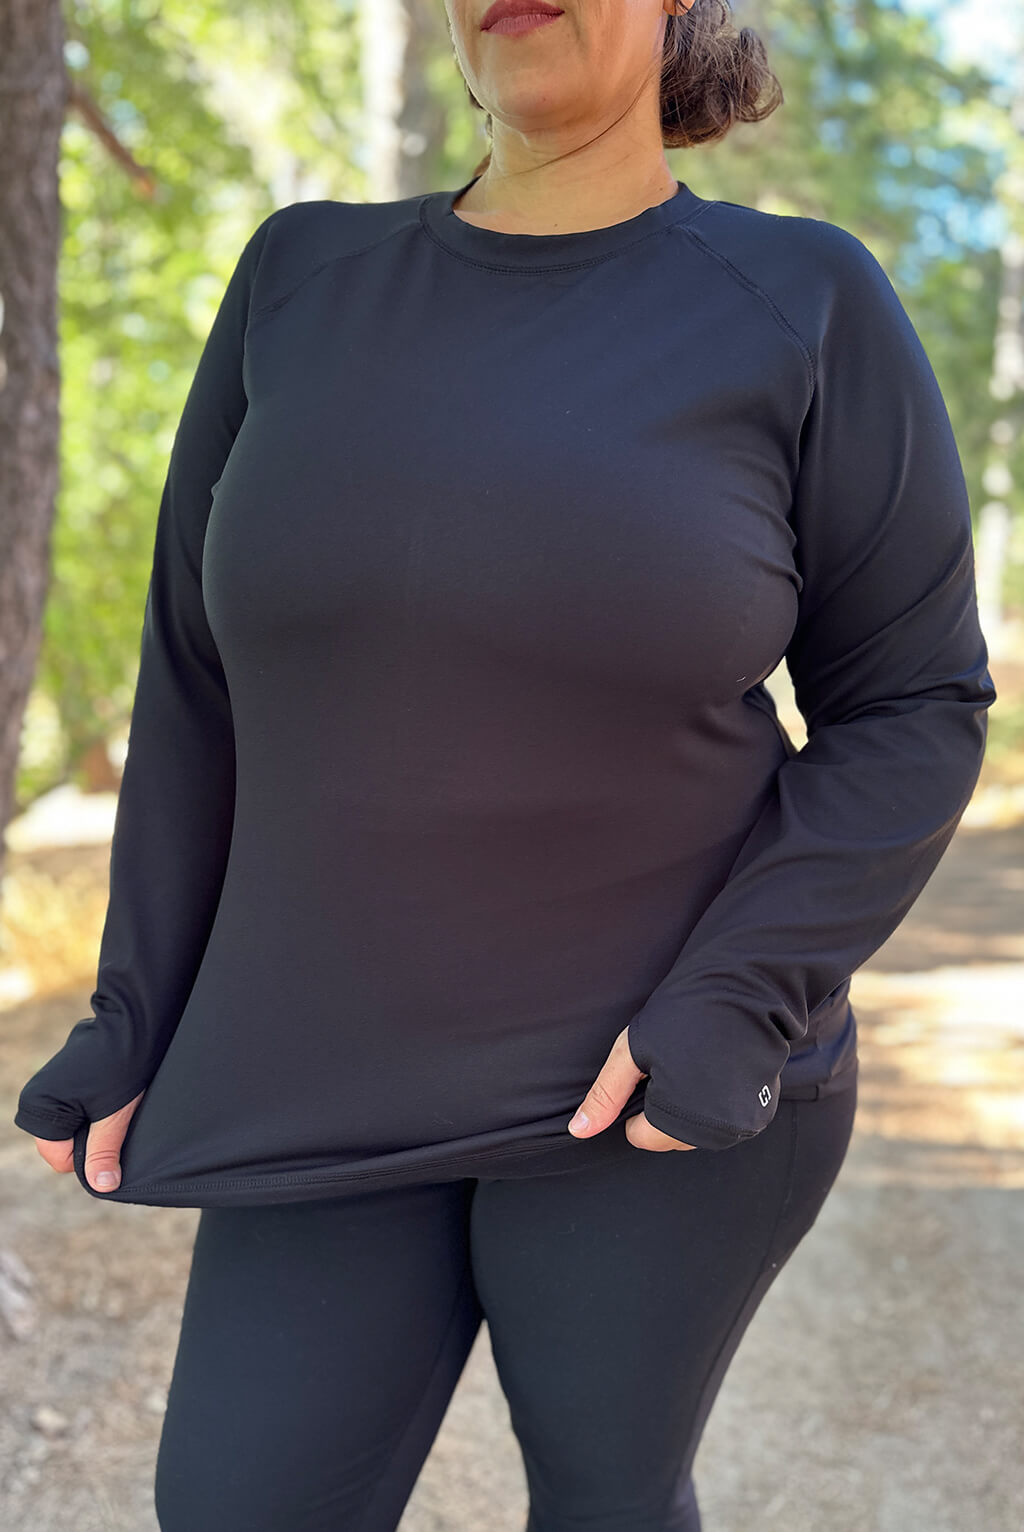 Long Sleeve Compression top – Superfit Hero